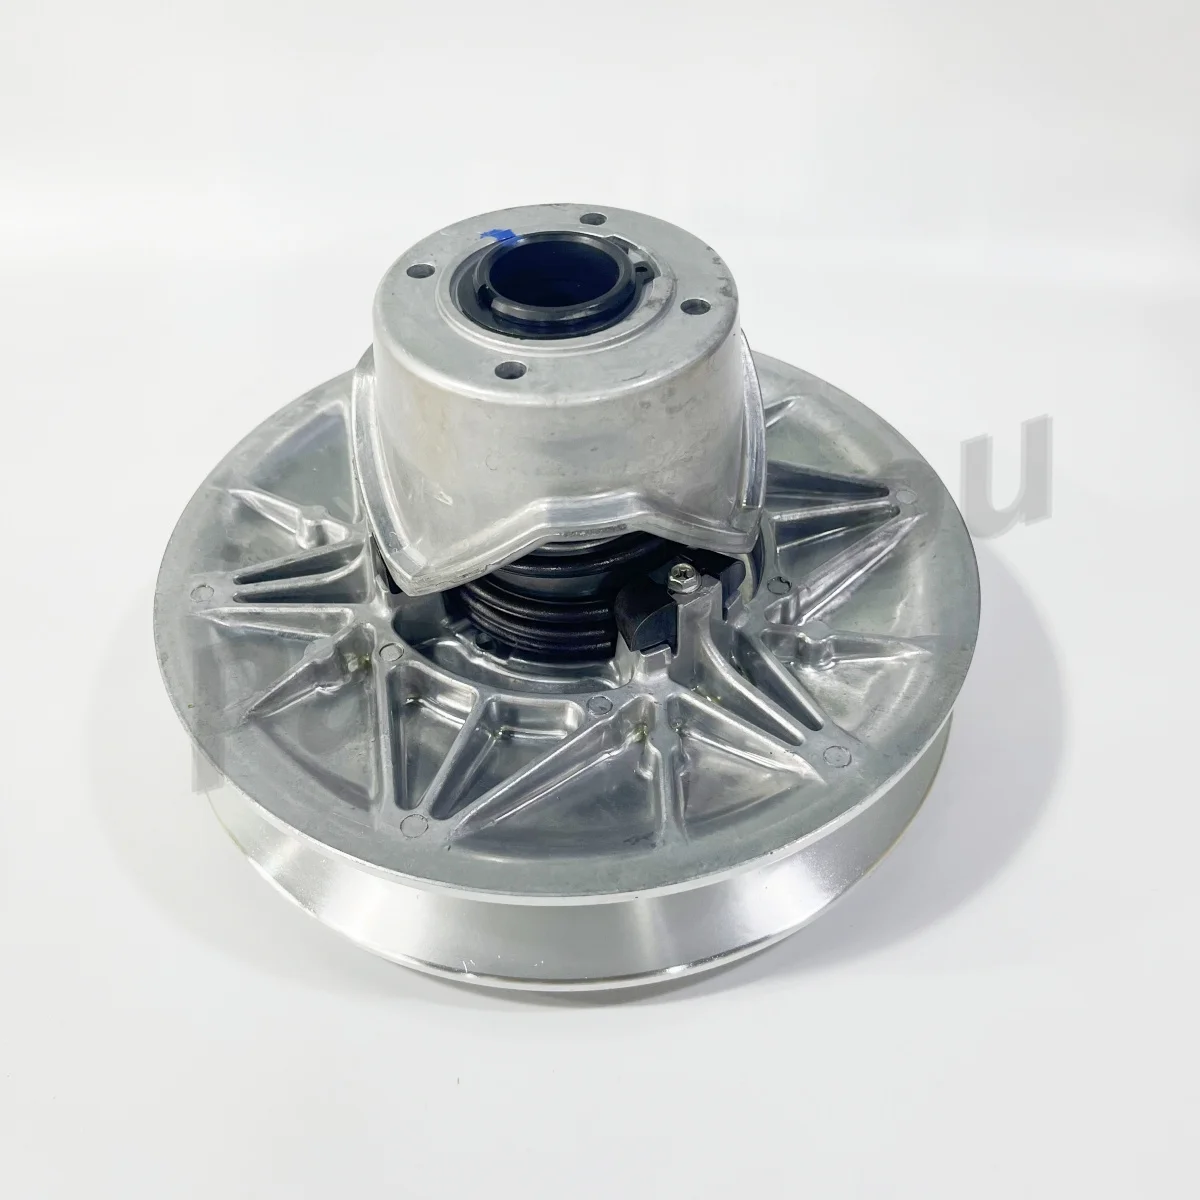 Driven Pulley Seconday Clutch Assy for CFMoto 800XC 850 X8H.O. 950 Sport 1000 Overland X10 1000 XL U10 Z10 2V91Y 0JYA-052000